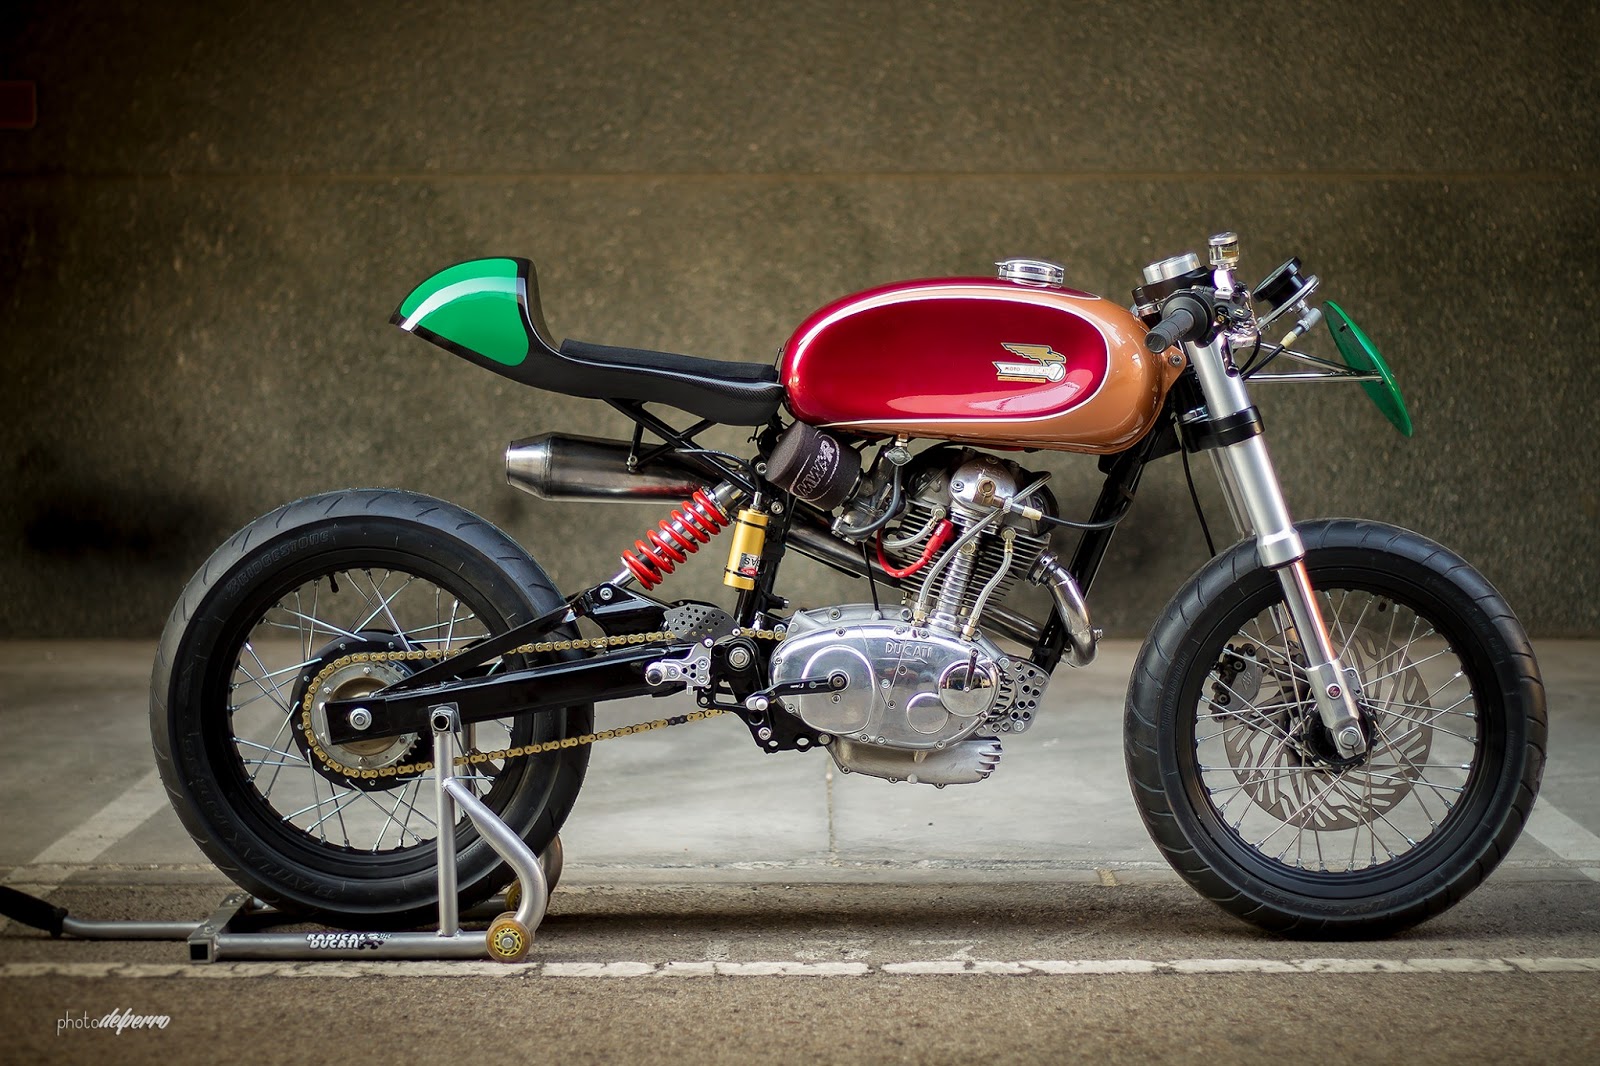 Radical Ducati  images by DEL PERRO  via Inazuma Cafe Racer